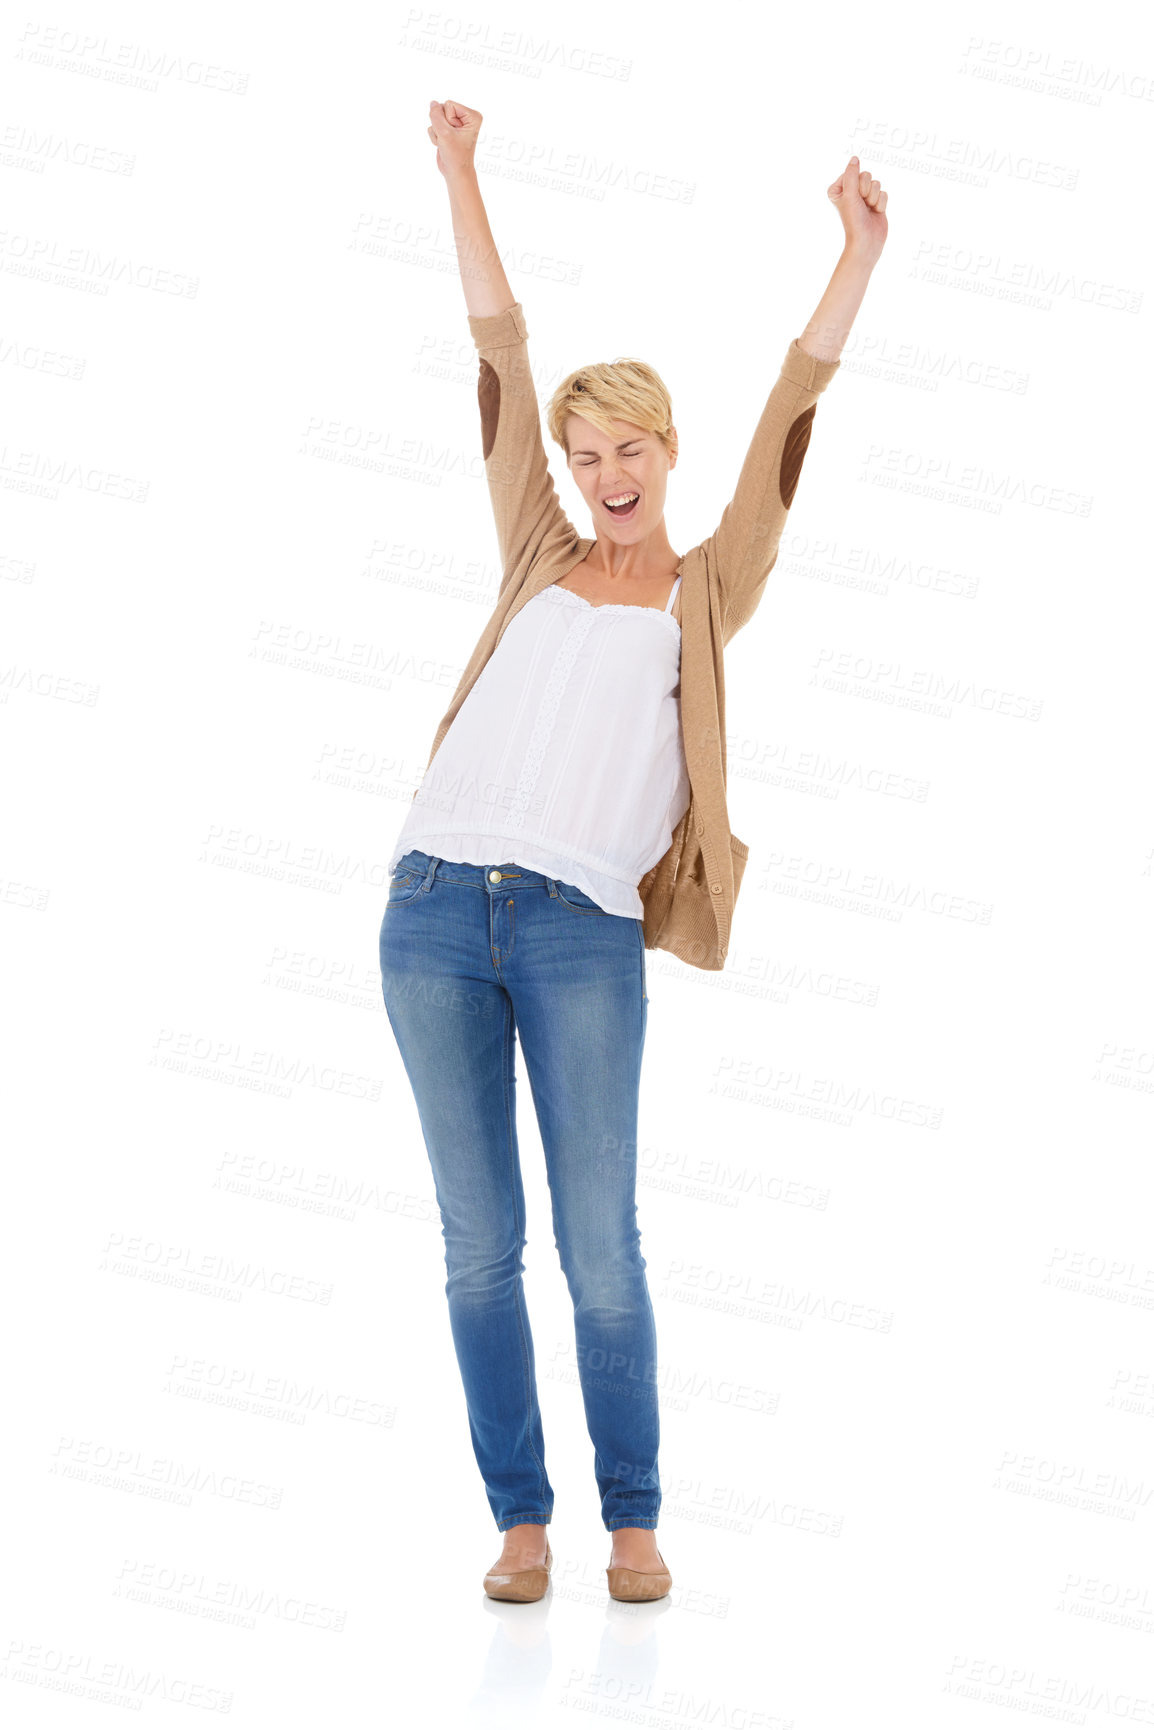 Buy stock photo Full length of an excited young woman celebrating while isolated on a white background